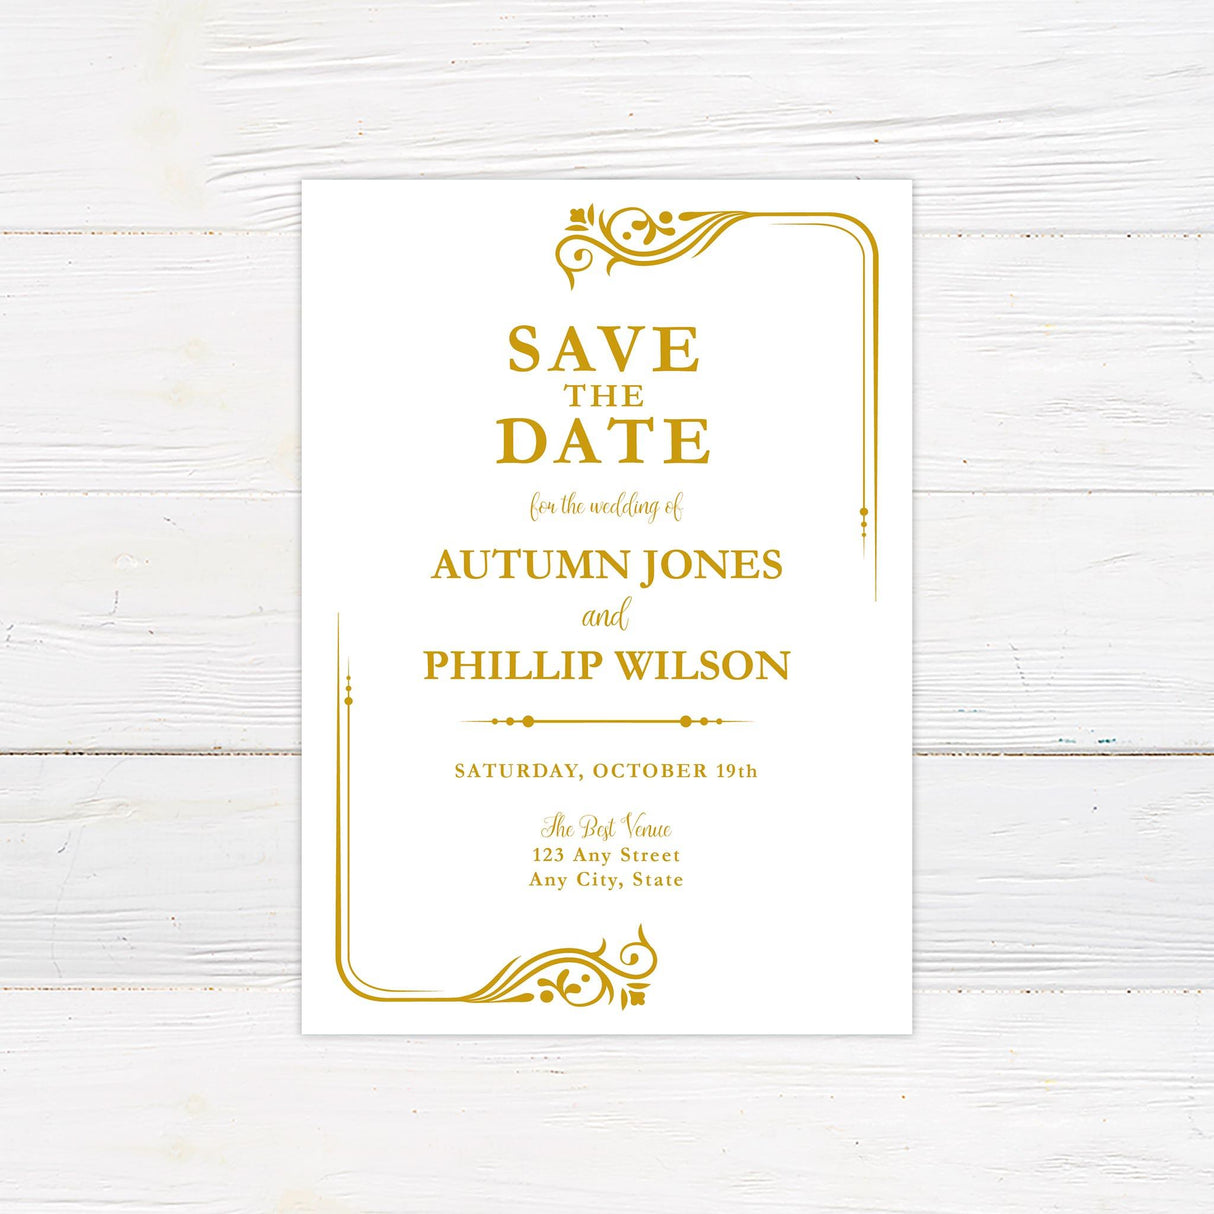 Once Upon a Time Invitations - goprintplus